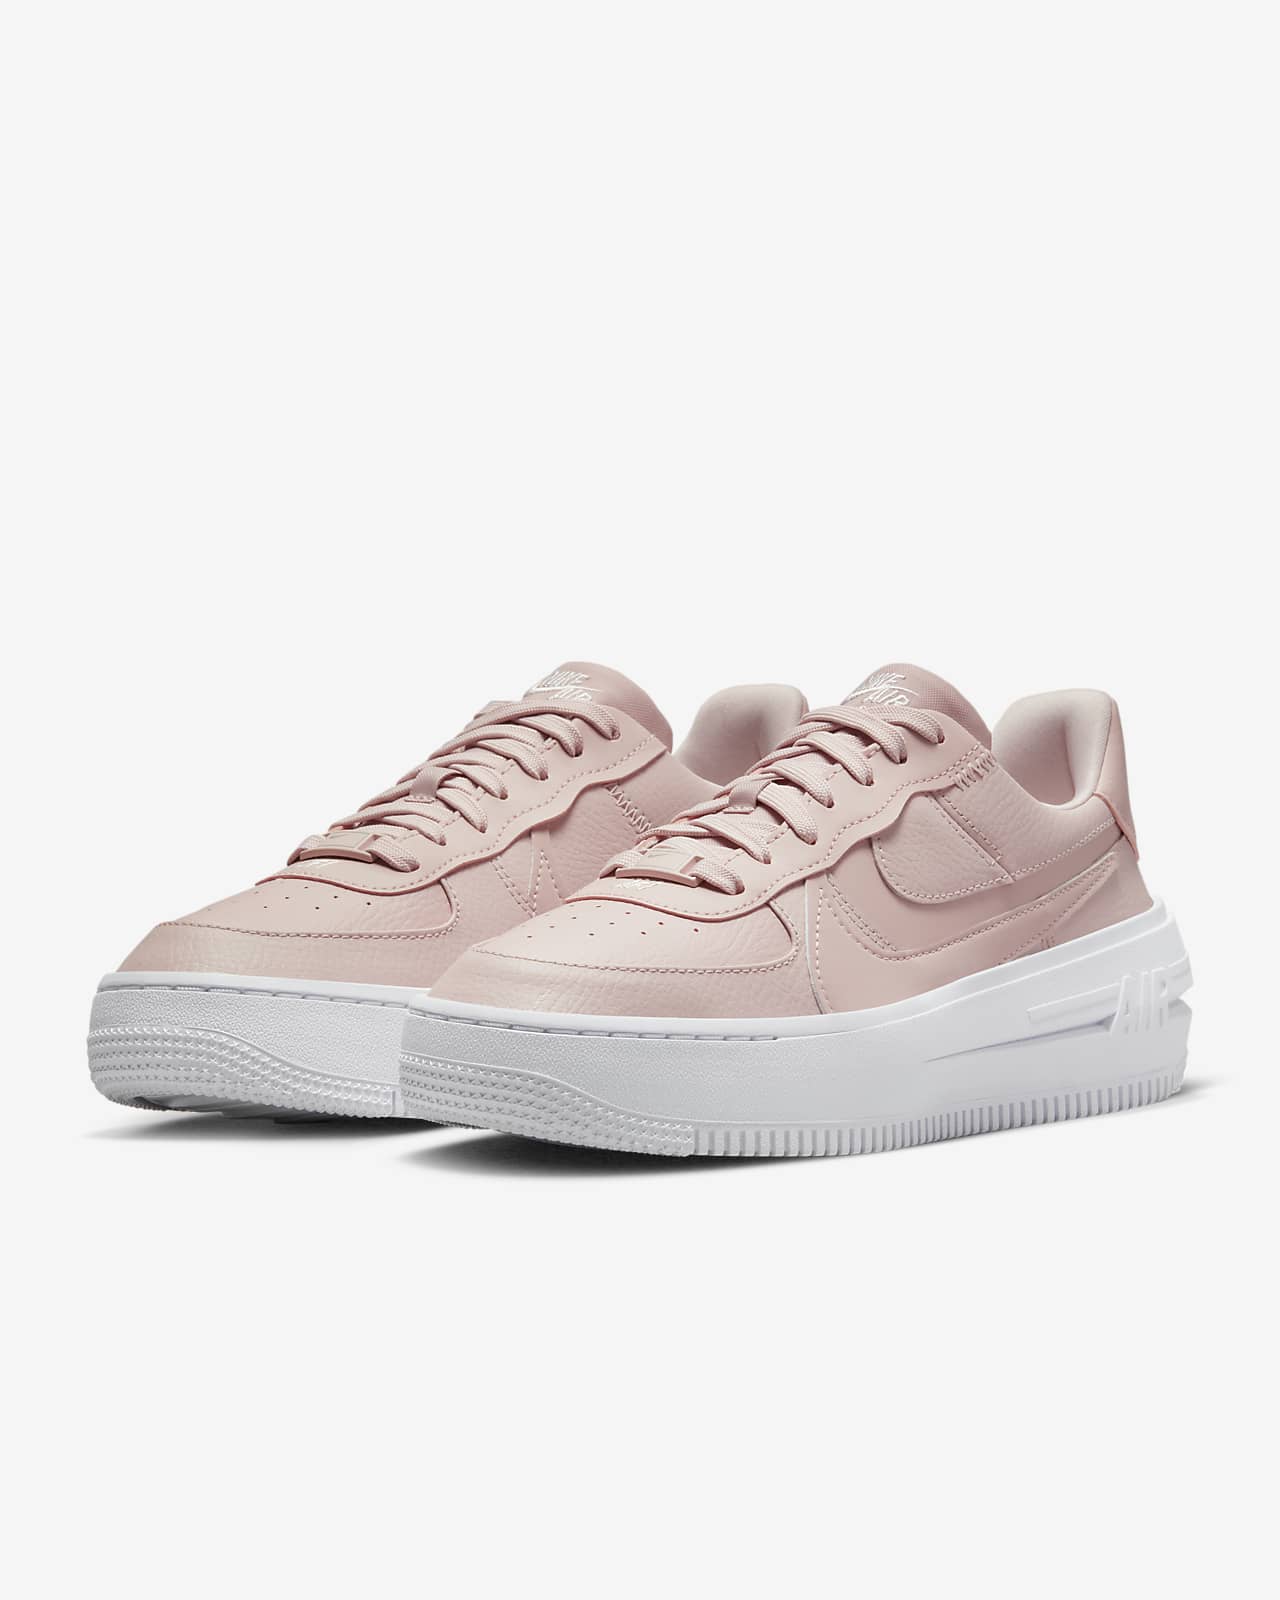 klei Ziekte vrede Nike Air Force 1 PLT.AF.ORM Women's Shoes. Nike.com